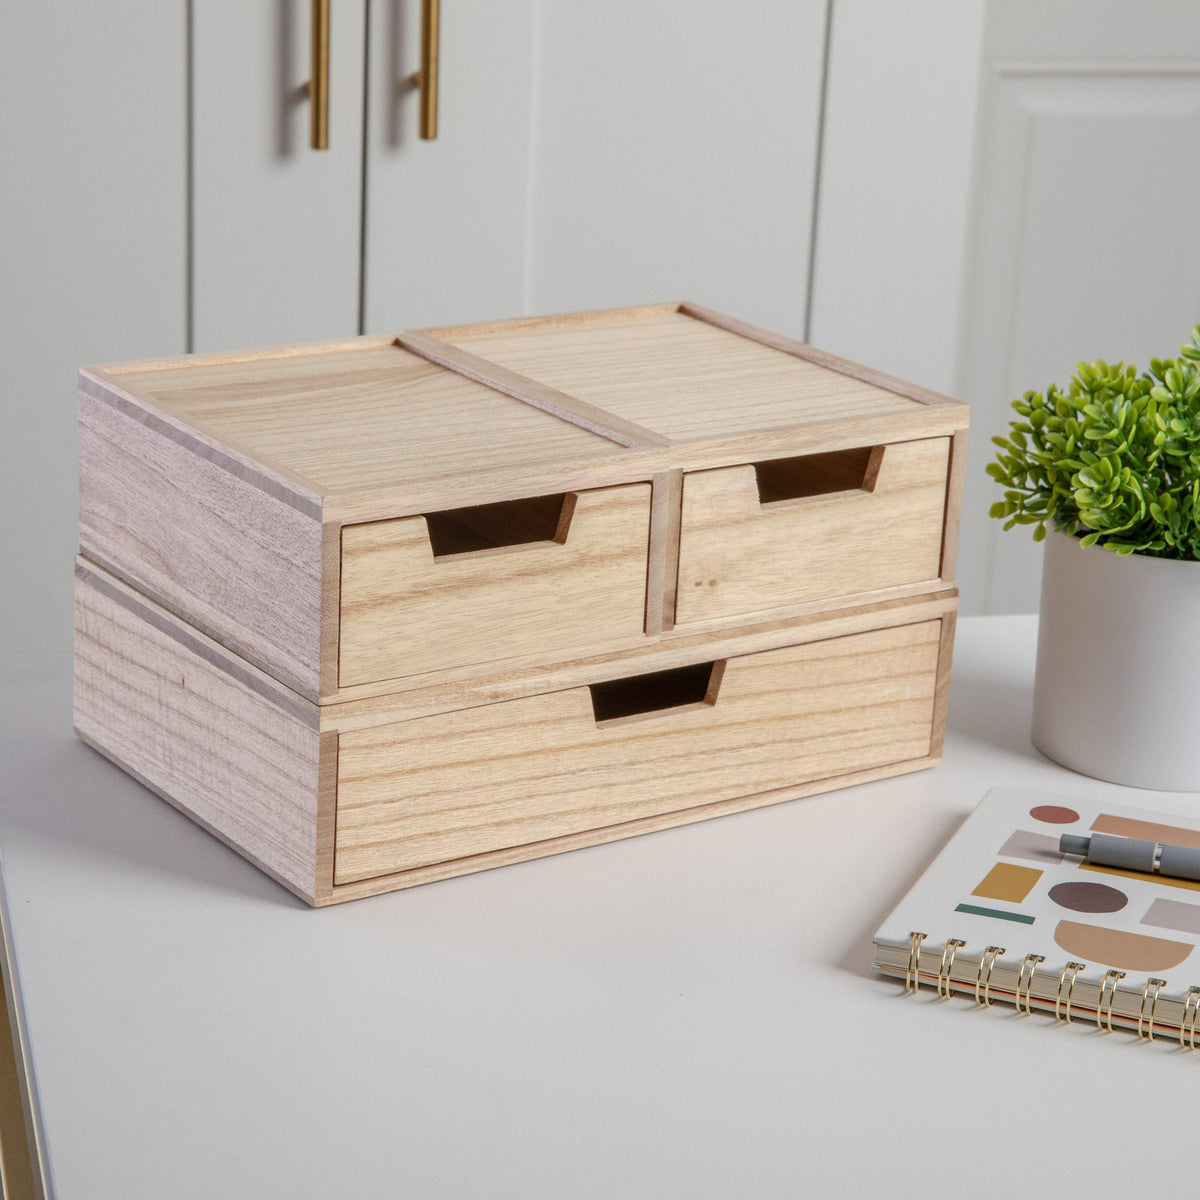 Light Natural |#| Set of 3 Paulownia Wood Storage Boxes with Pullout Drawers in Light Natural